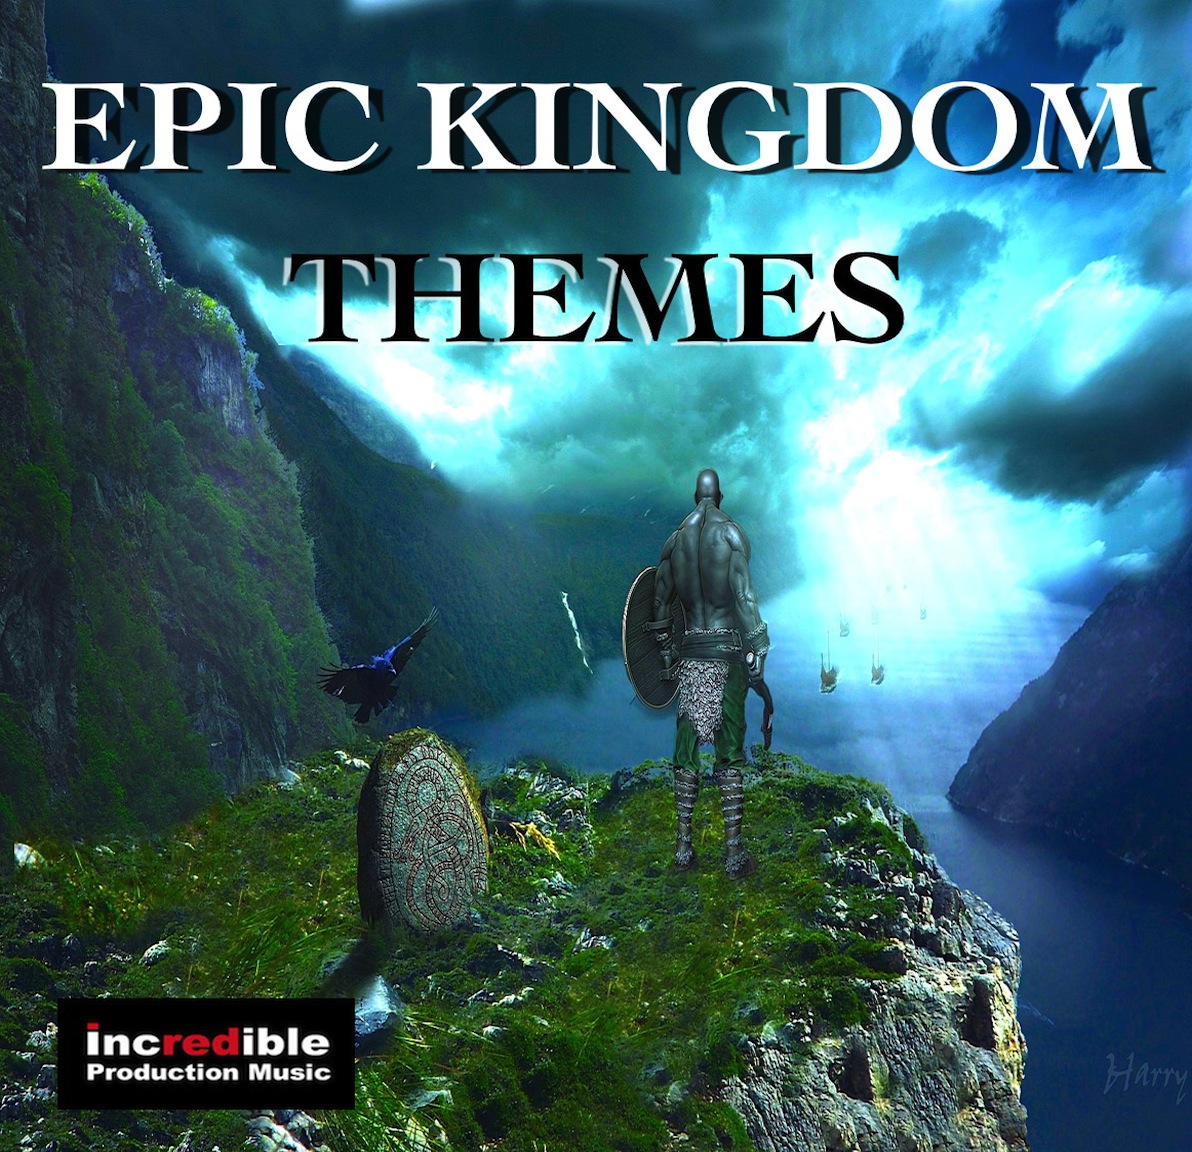 epic themes